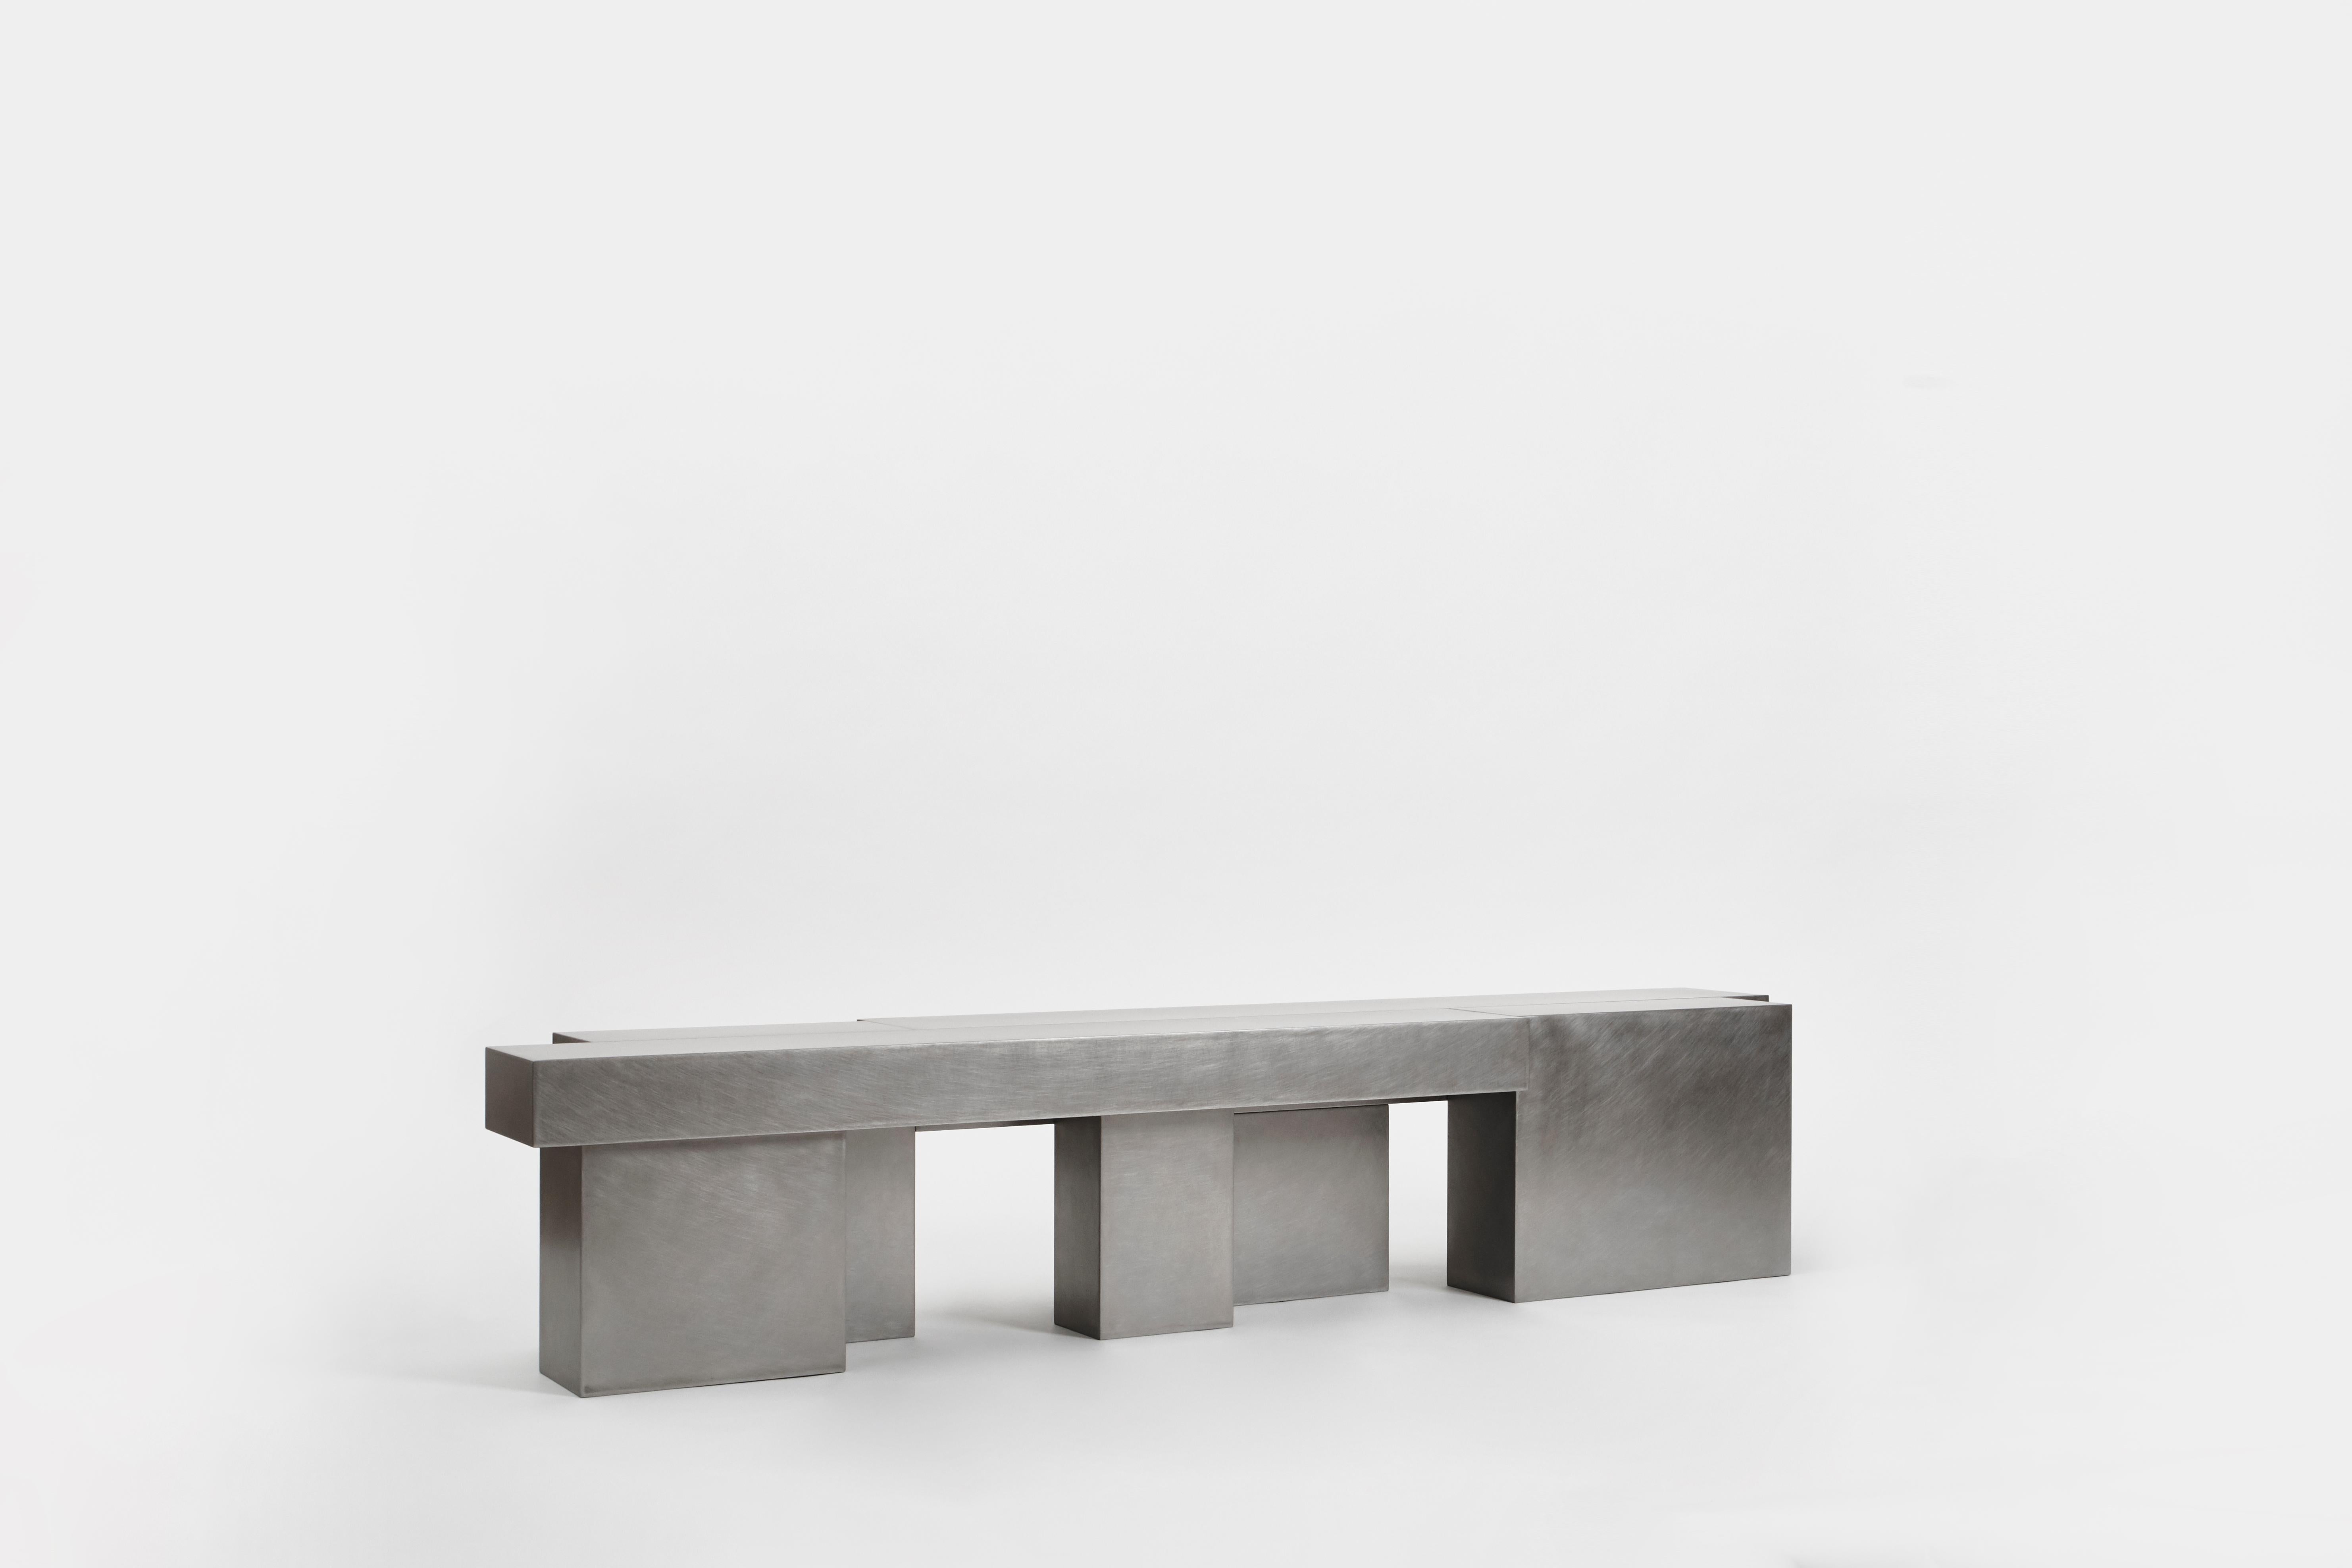 Layered steel bench by Hyungshin Hwang
Dimensions: D 36 x W 180 x H 36 cm
Materials: Stainless Steel

Layered Series is the main theme and concept of work of Hwang, who continues his experiment which is based on architectural composition of